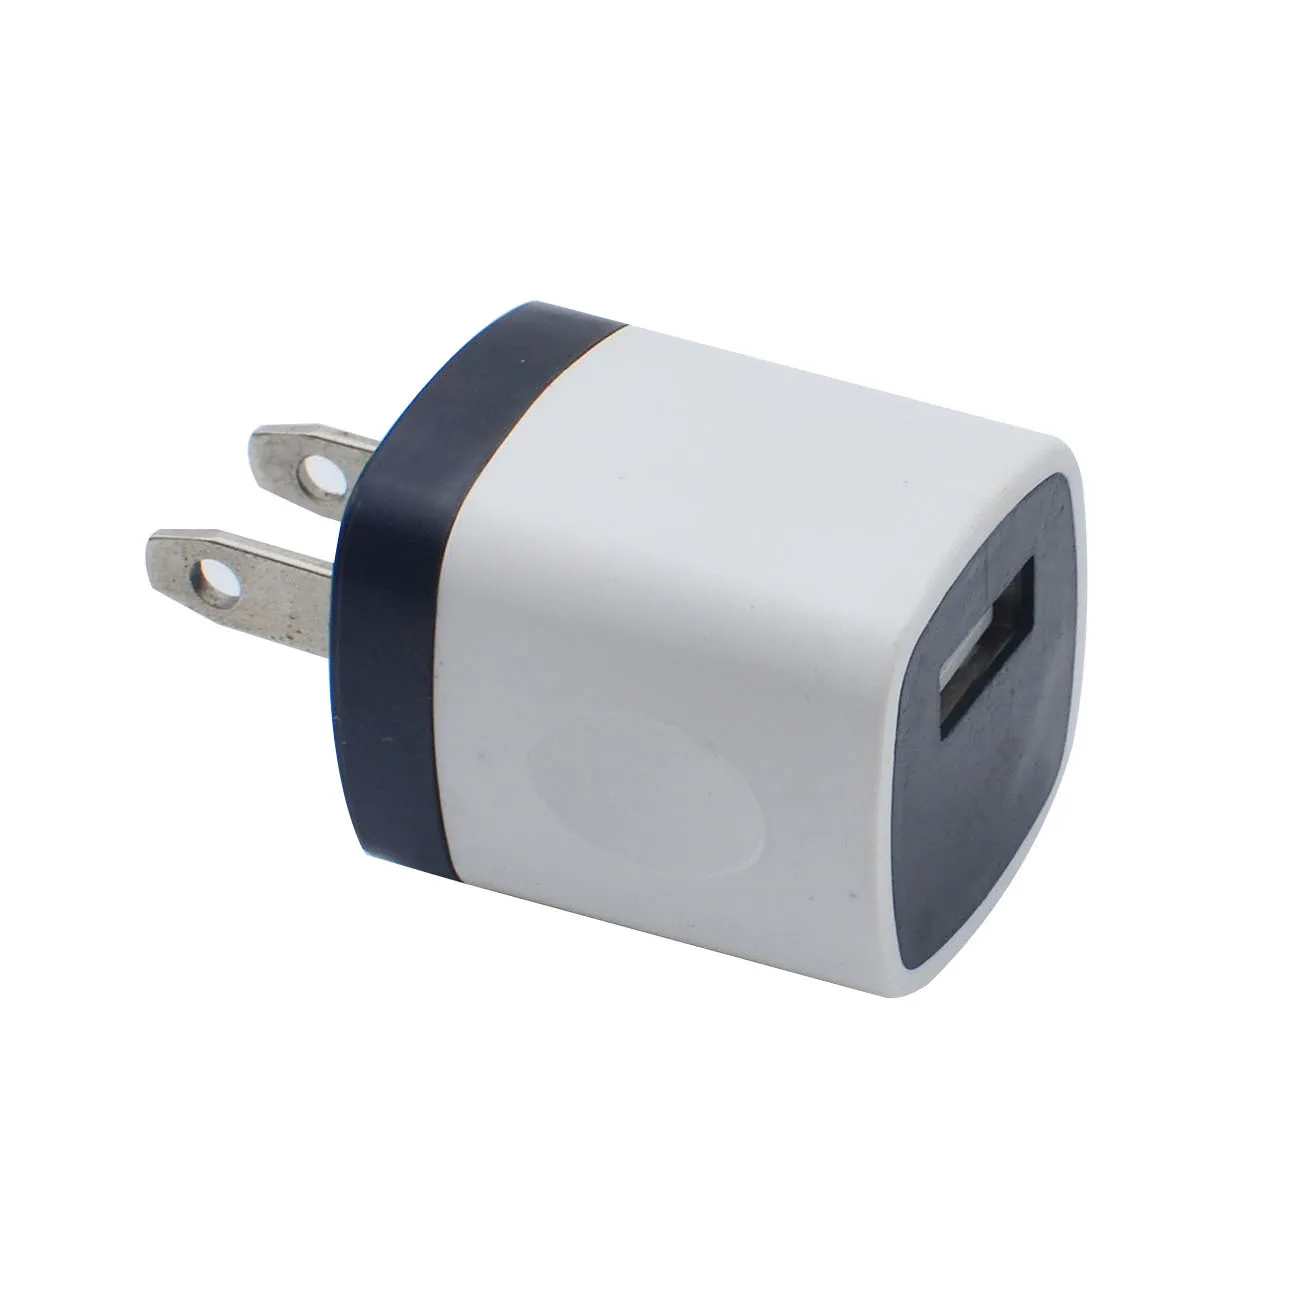 Colorful 5V 1A Mobile Phone Charger Charging Small Size for Iphone 8 Plus Samsung Galaxy S9+ Huawei Mate 20 X Usb Wall Charger